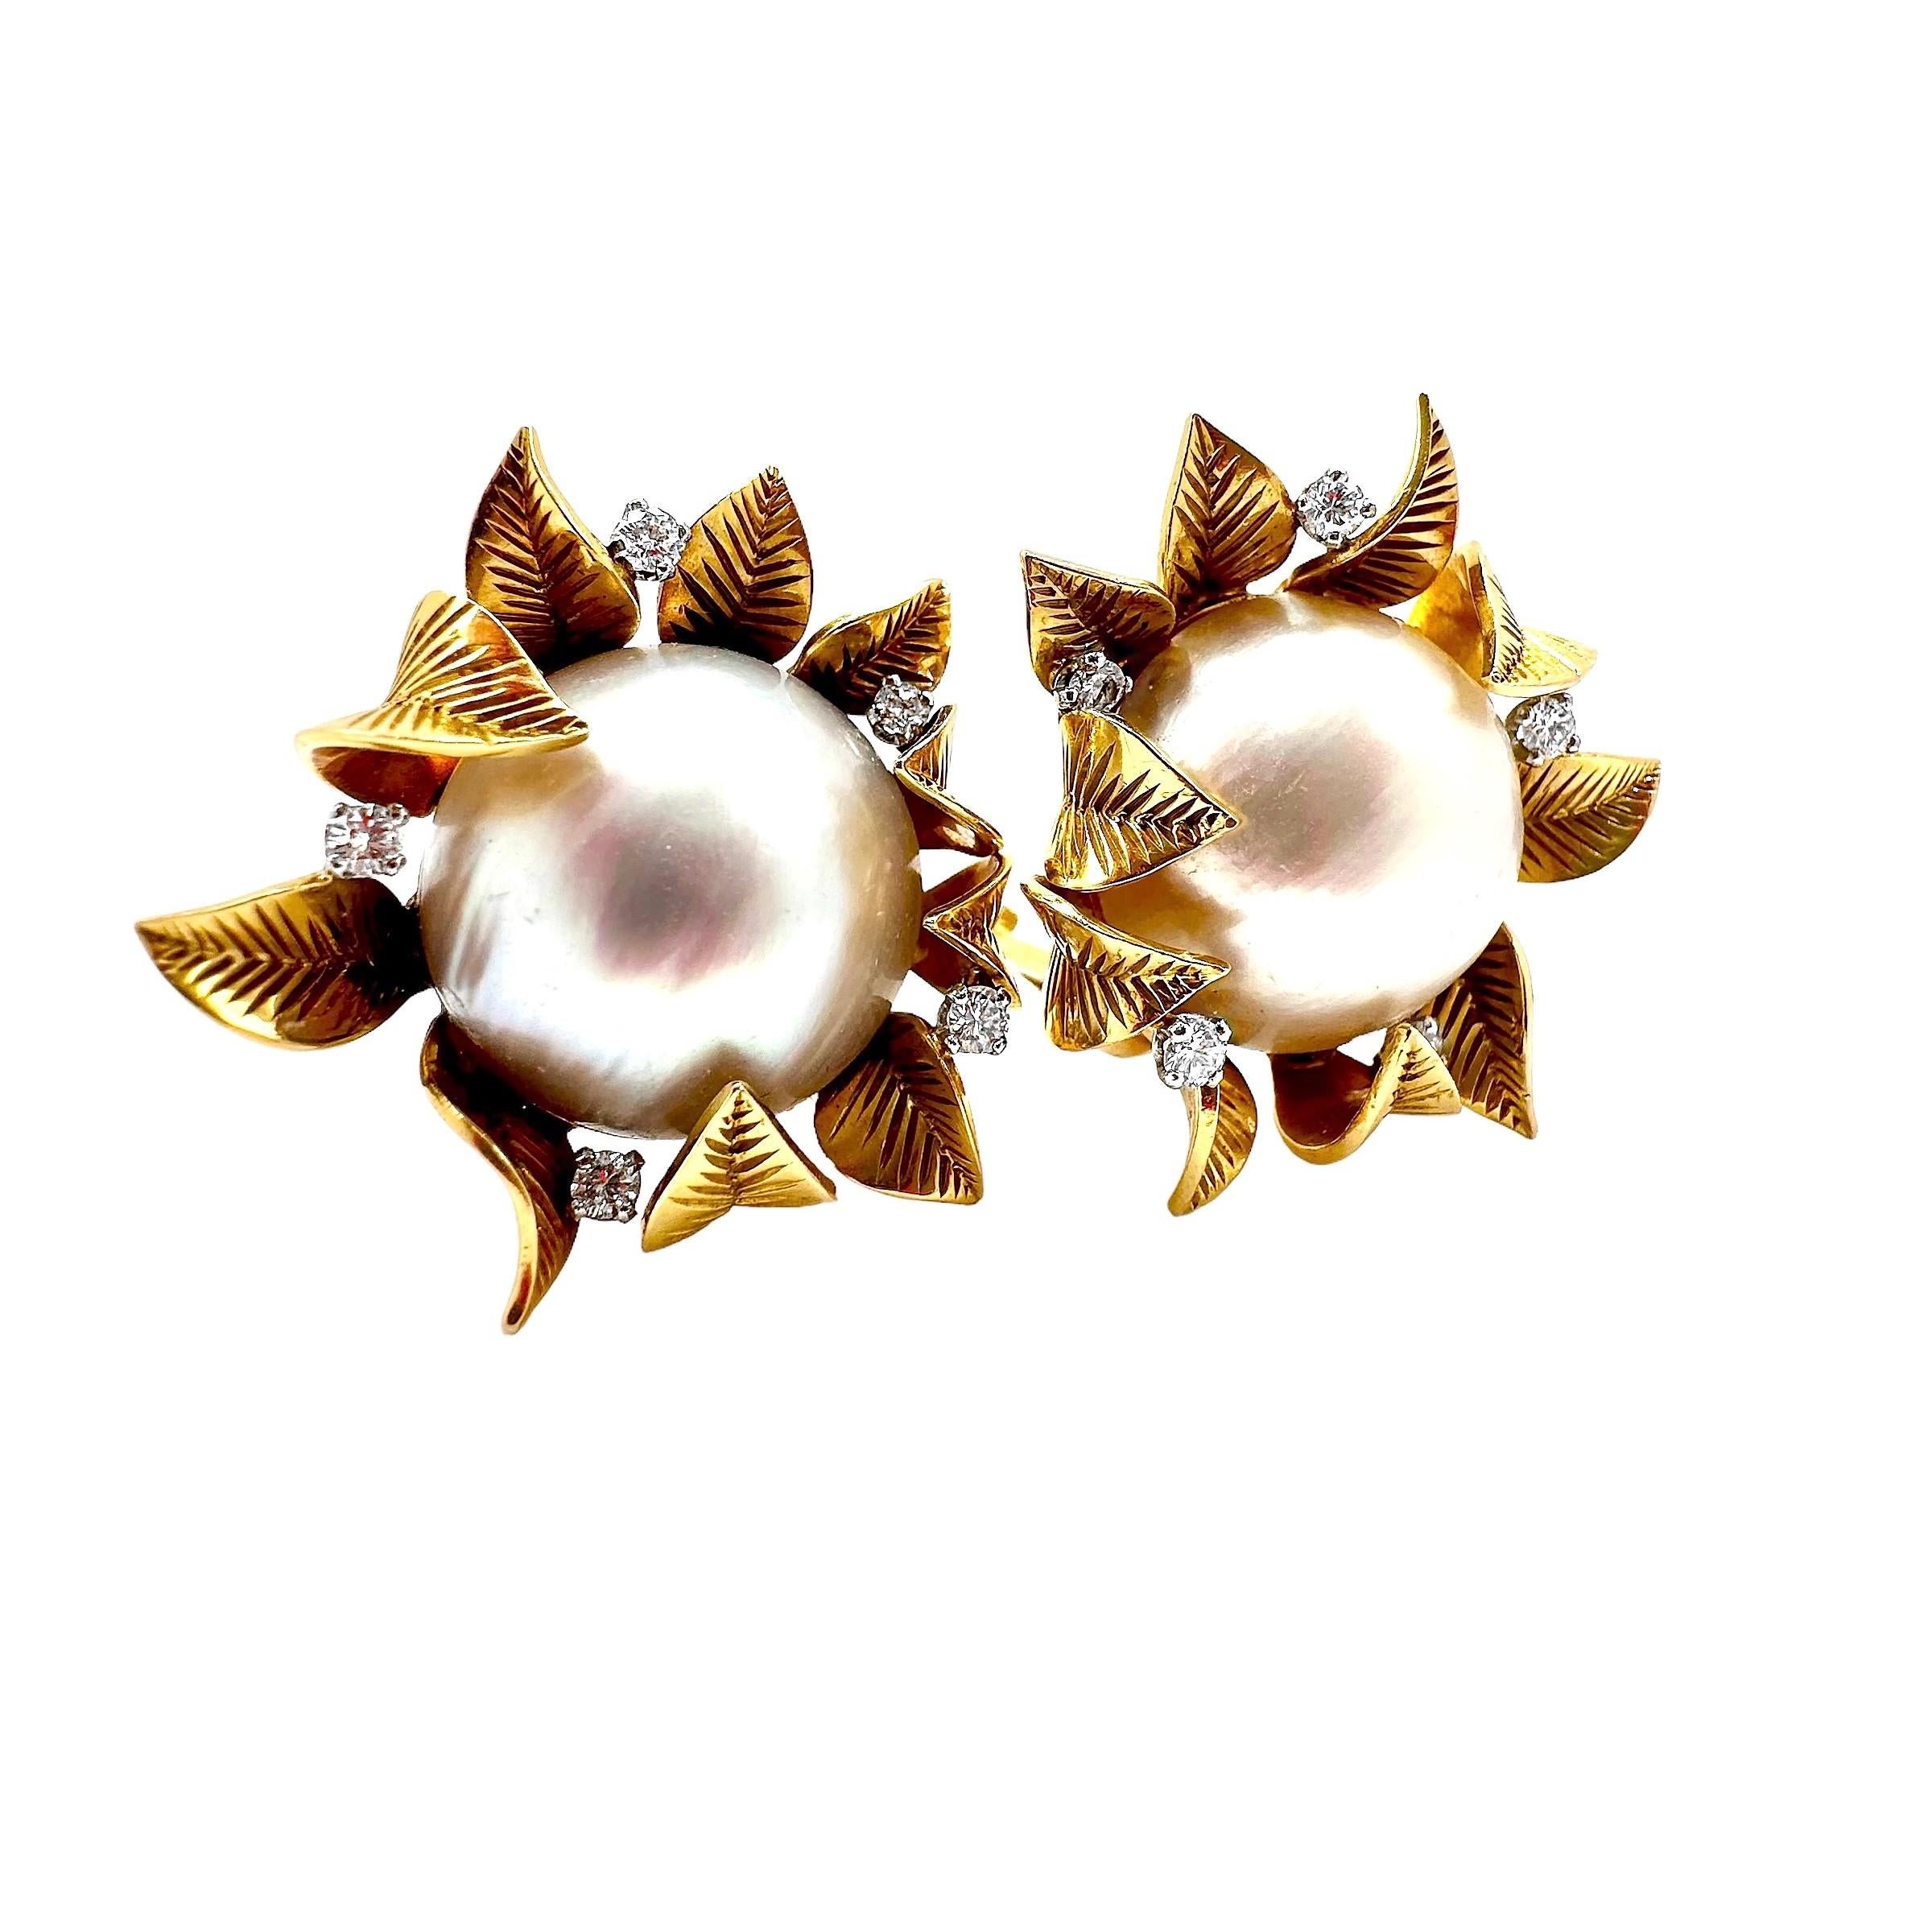 Brilliant Cut French 18K Gold Earrings with Mobe Pearls Surrounded by Leaves and Diamonds For Sale